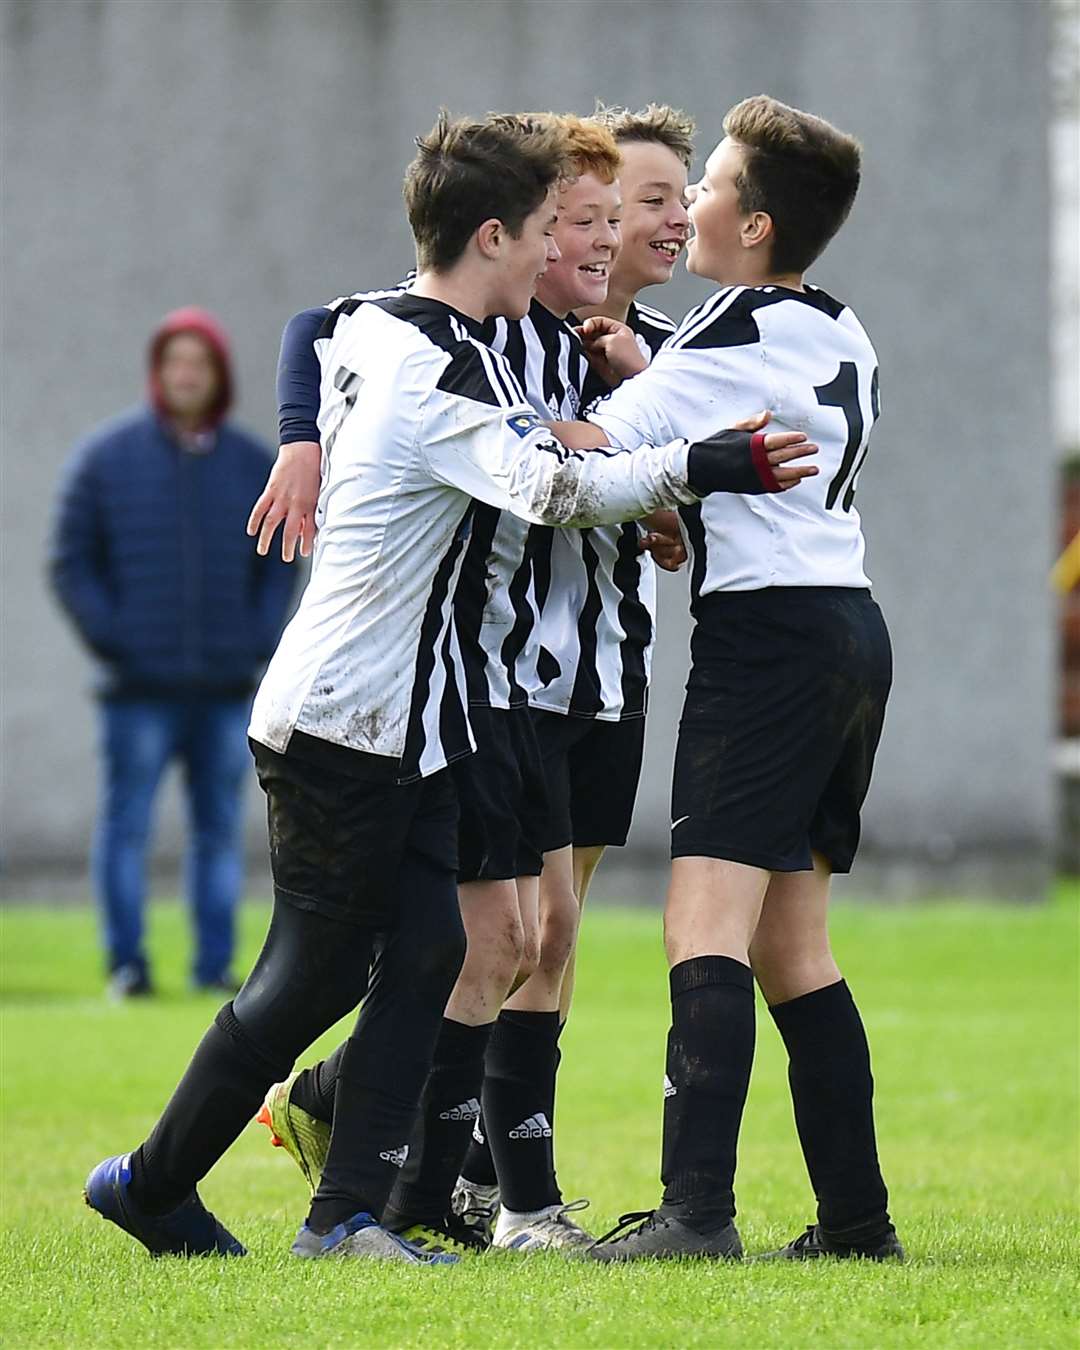 Euan Kennedy, Lee Gordon and Owen Bain celebrate with Morgan Kennedy after he scored the decisive fourth goal for United. Picture: Mel Roger